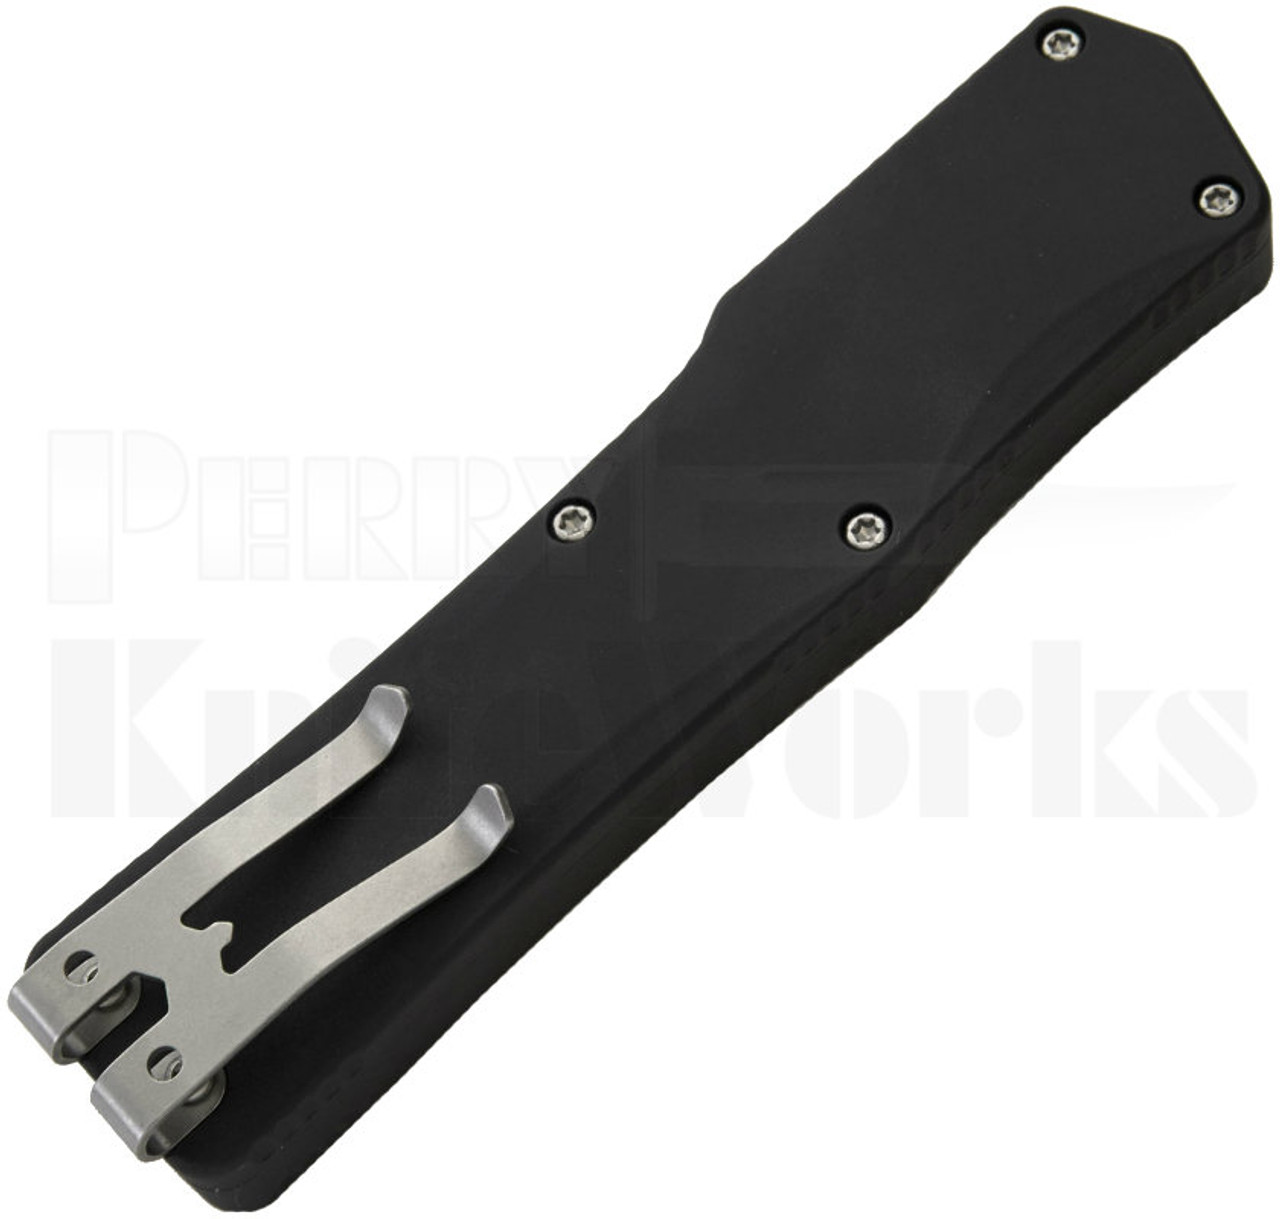 Heretic Knives Cleric Bayonet OTF Automatic Knife Black Closed